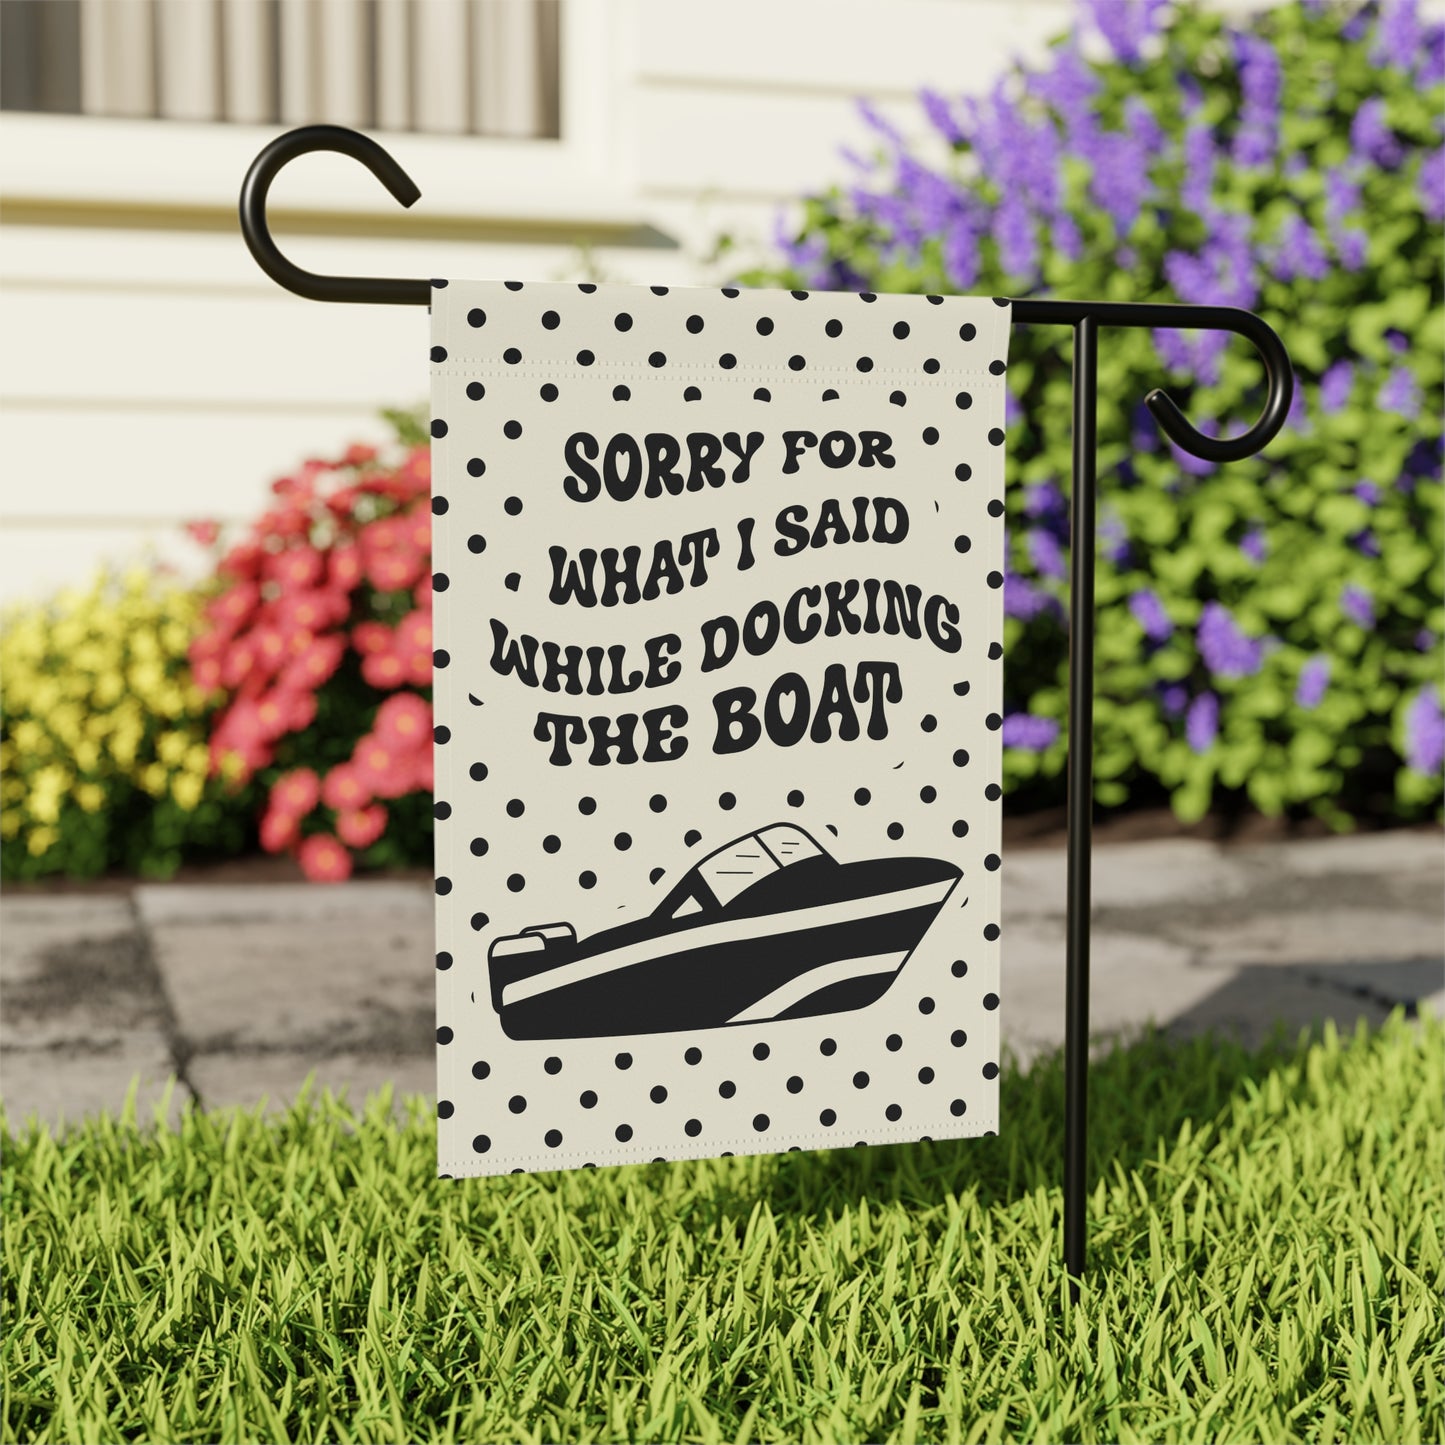 Boat Garden Flag, Lake House Decor, Sorry For What I Said While Docking the Boat, Summer Garden Flag, Gift for Boaters, Funny Boat Gift